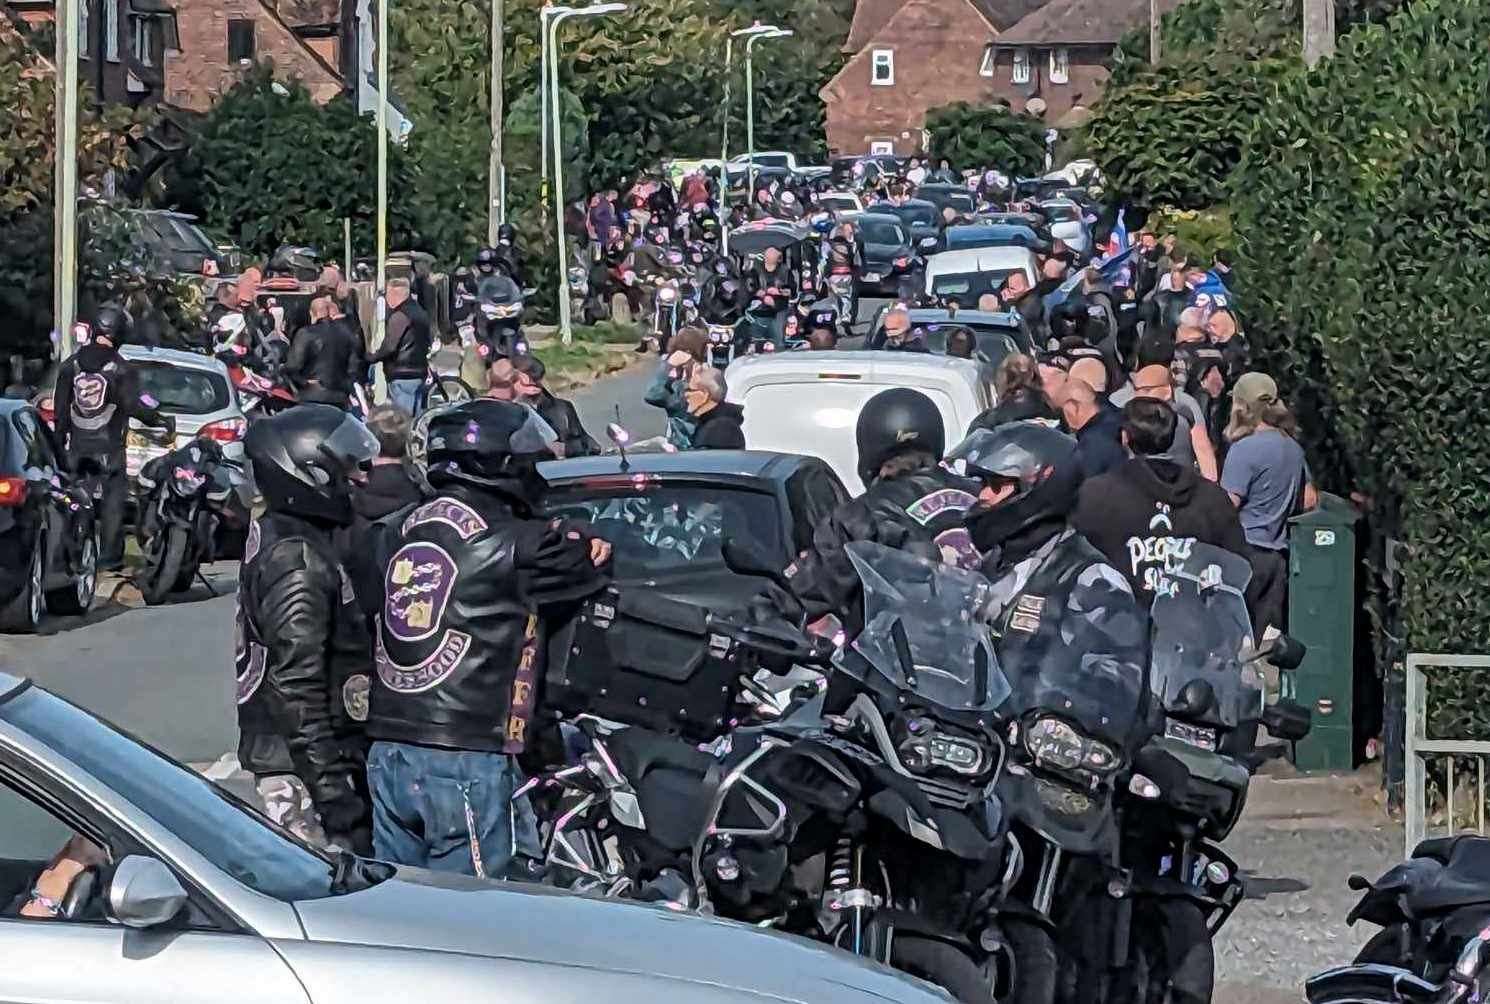 Traffic came to a standstill as hundreds of bikers escorted Glyn Clarke, who died in a hit-and-run in Harbledown, to his final resting place